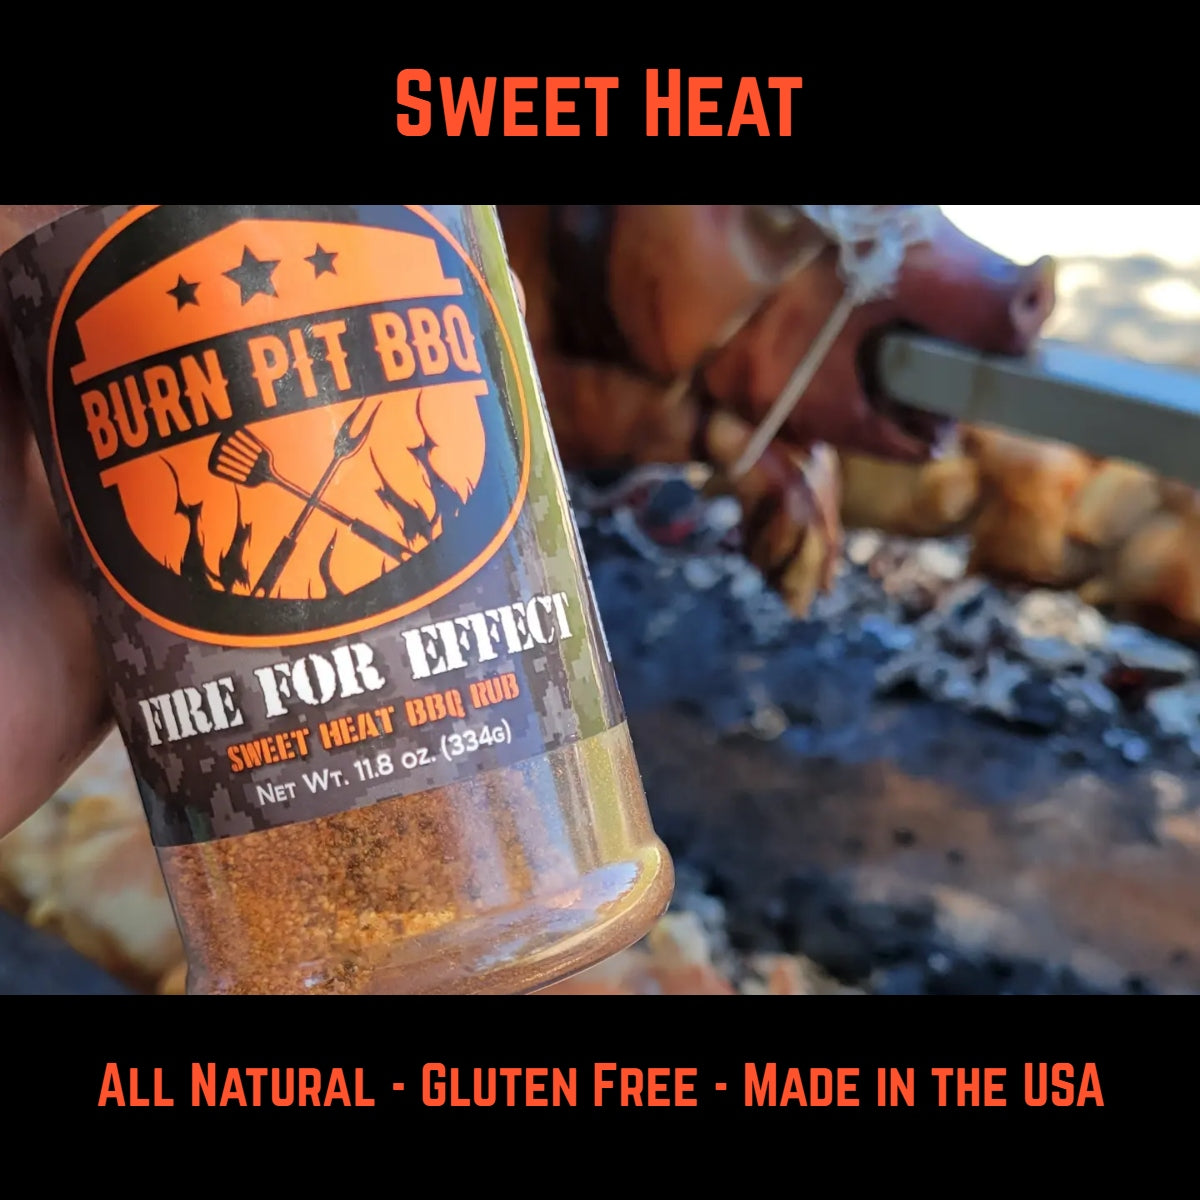 Burn Pit Sweet & Spicy 3 Pack